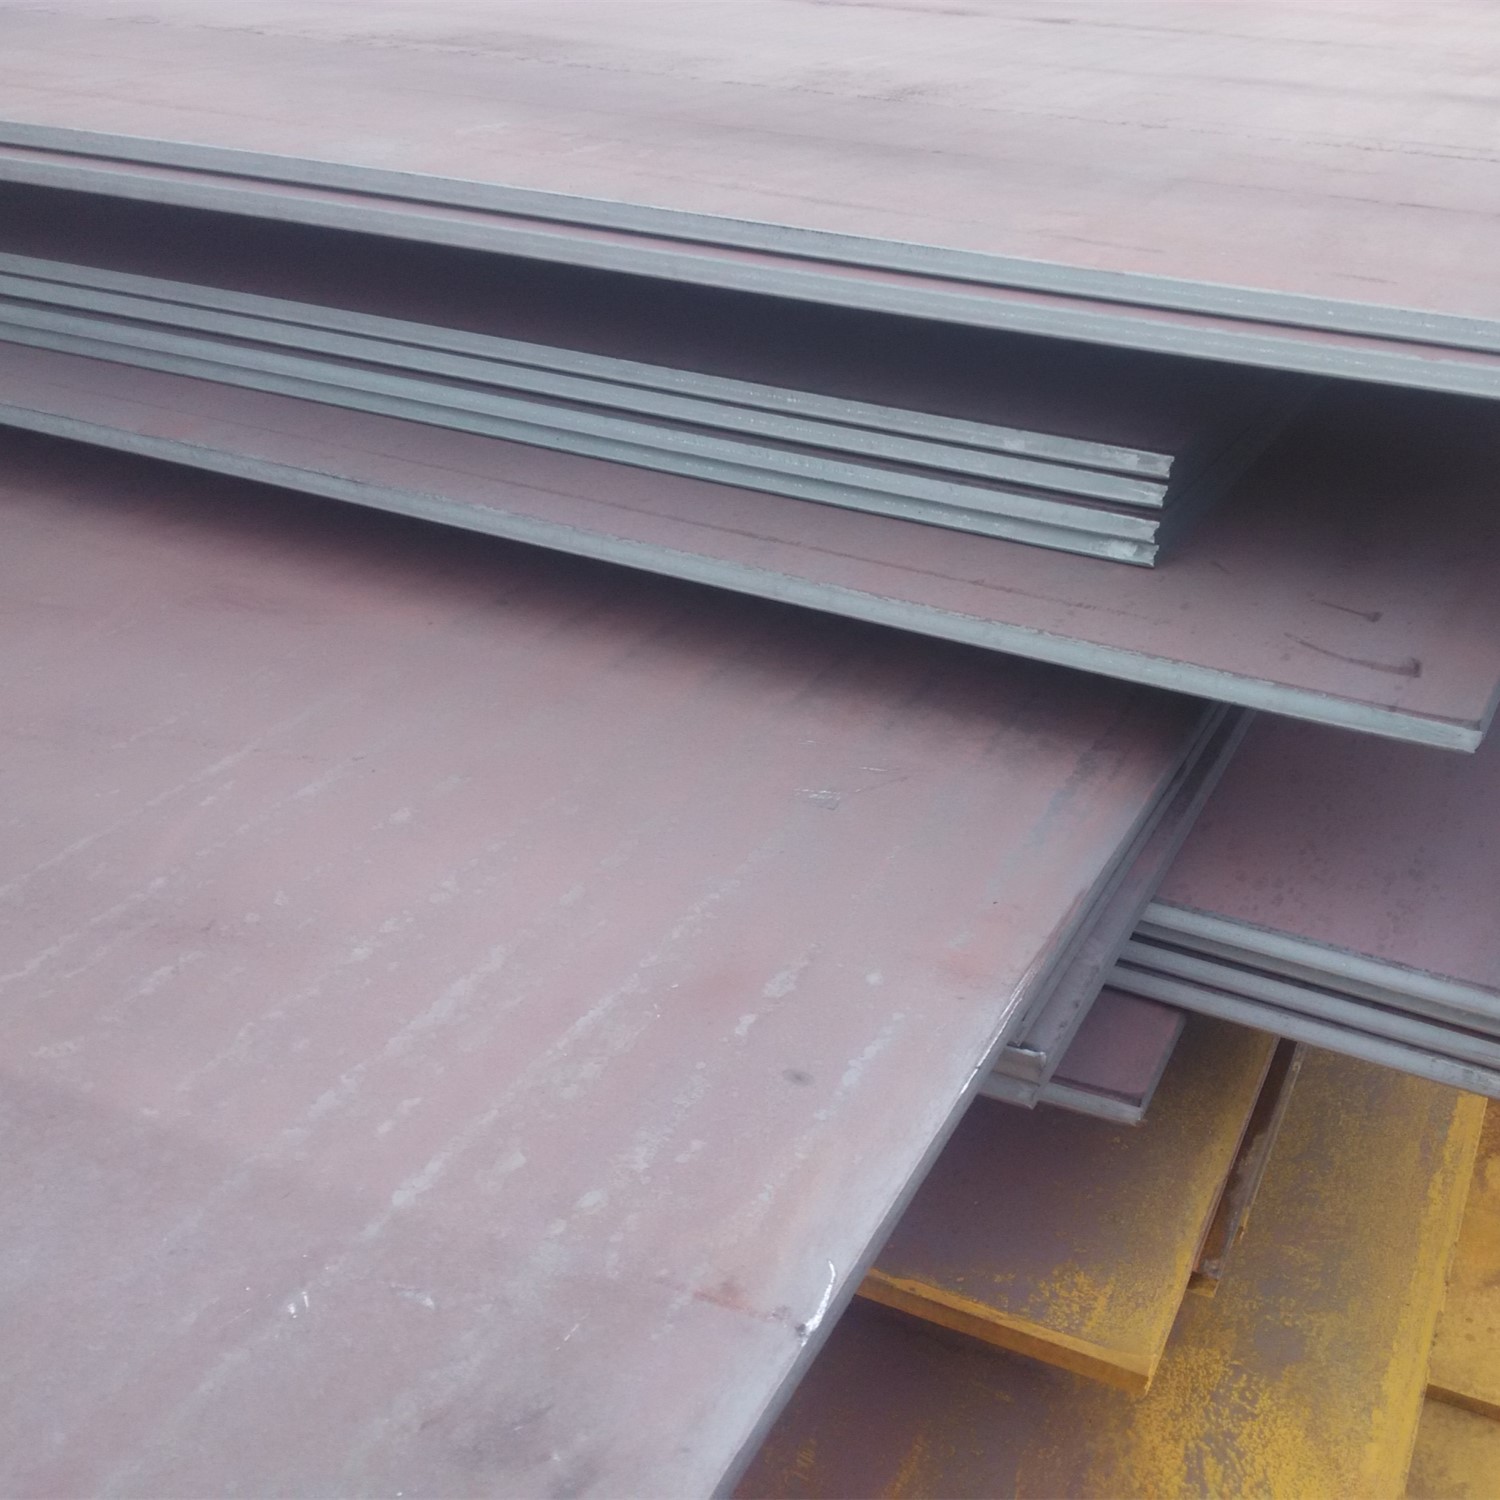 Abrasion resistant, wear-resistant steel plates Featured Image